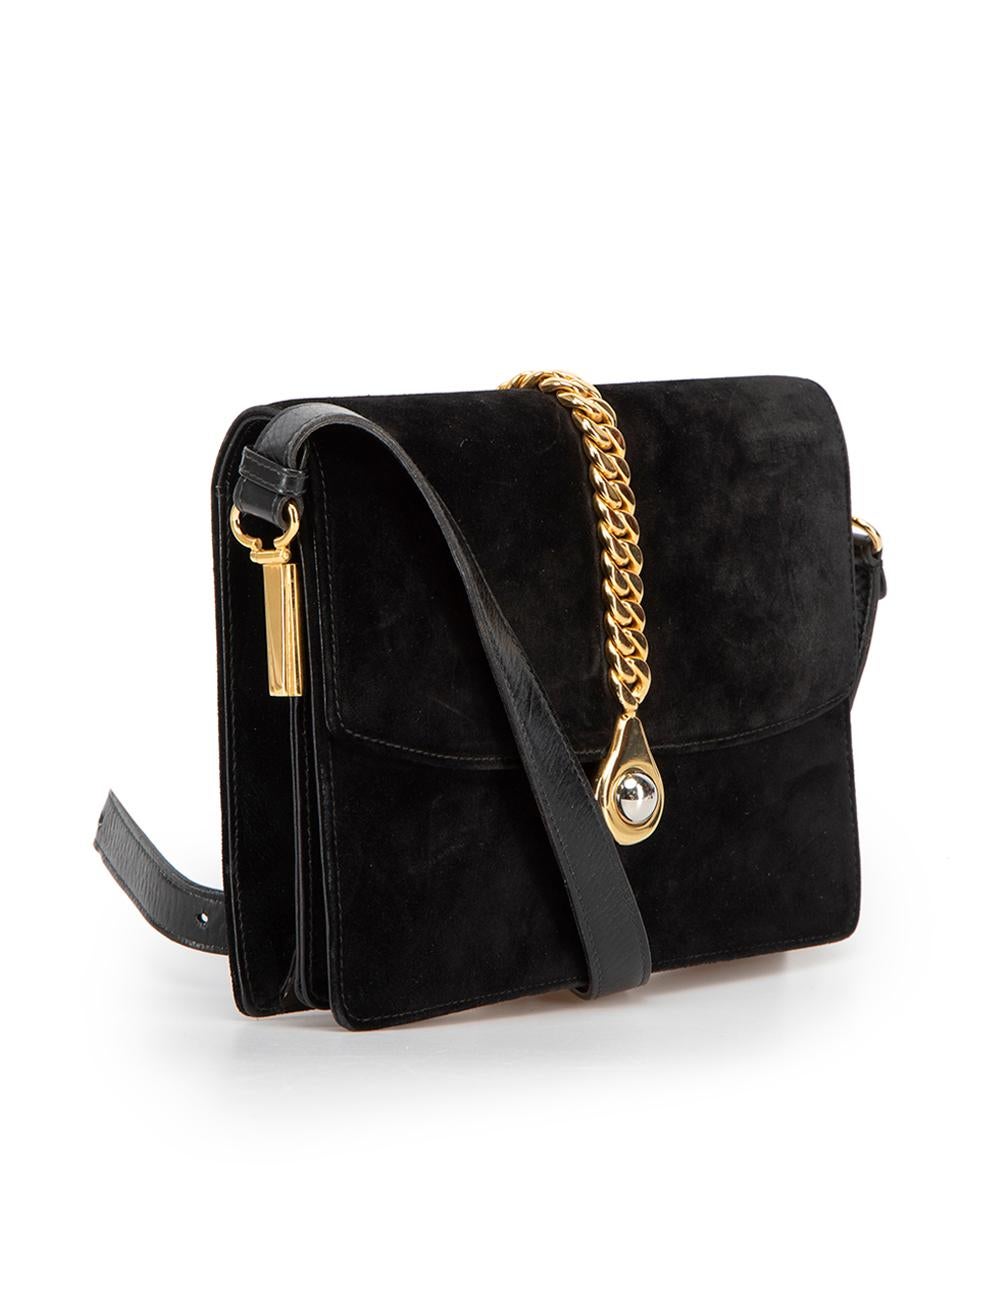 CONDITION is Very good. Minimal wear to bag is evident. Minimal wear to the exterior of the suede with scuff marks on this used Gucci designer resale item. 



Details


Black

Suede

Mini shoulder bag

1x Adjustable shoulder strap

Gold chain